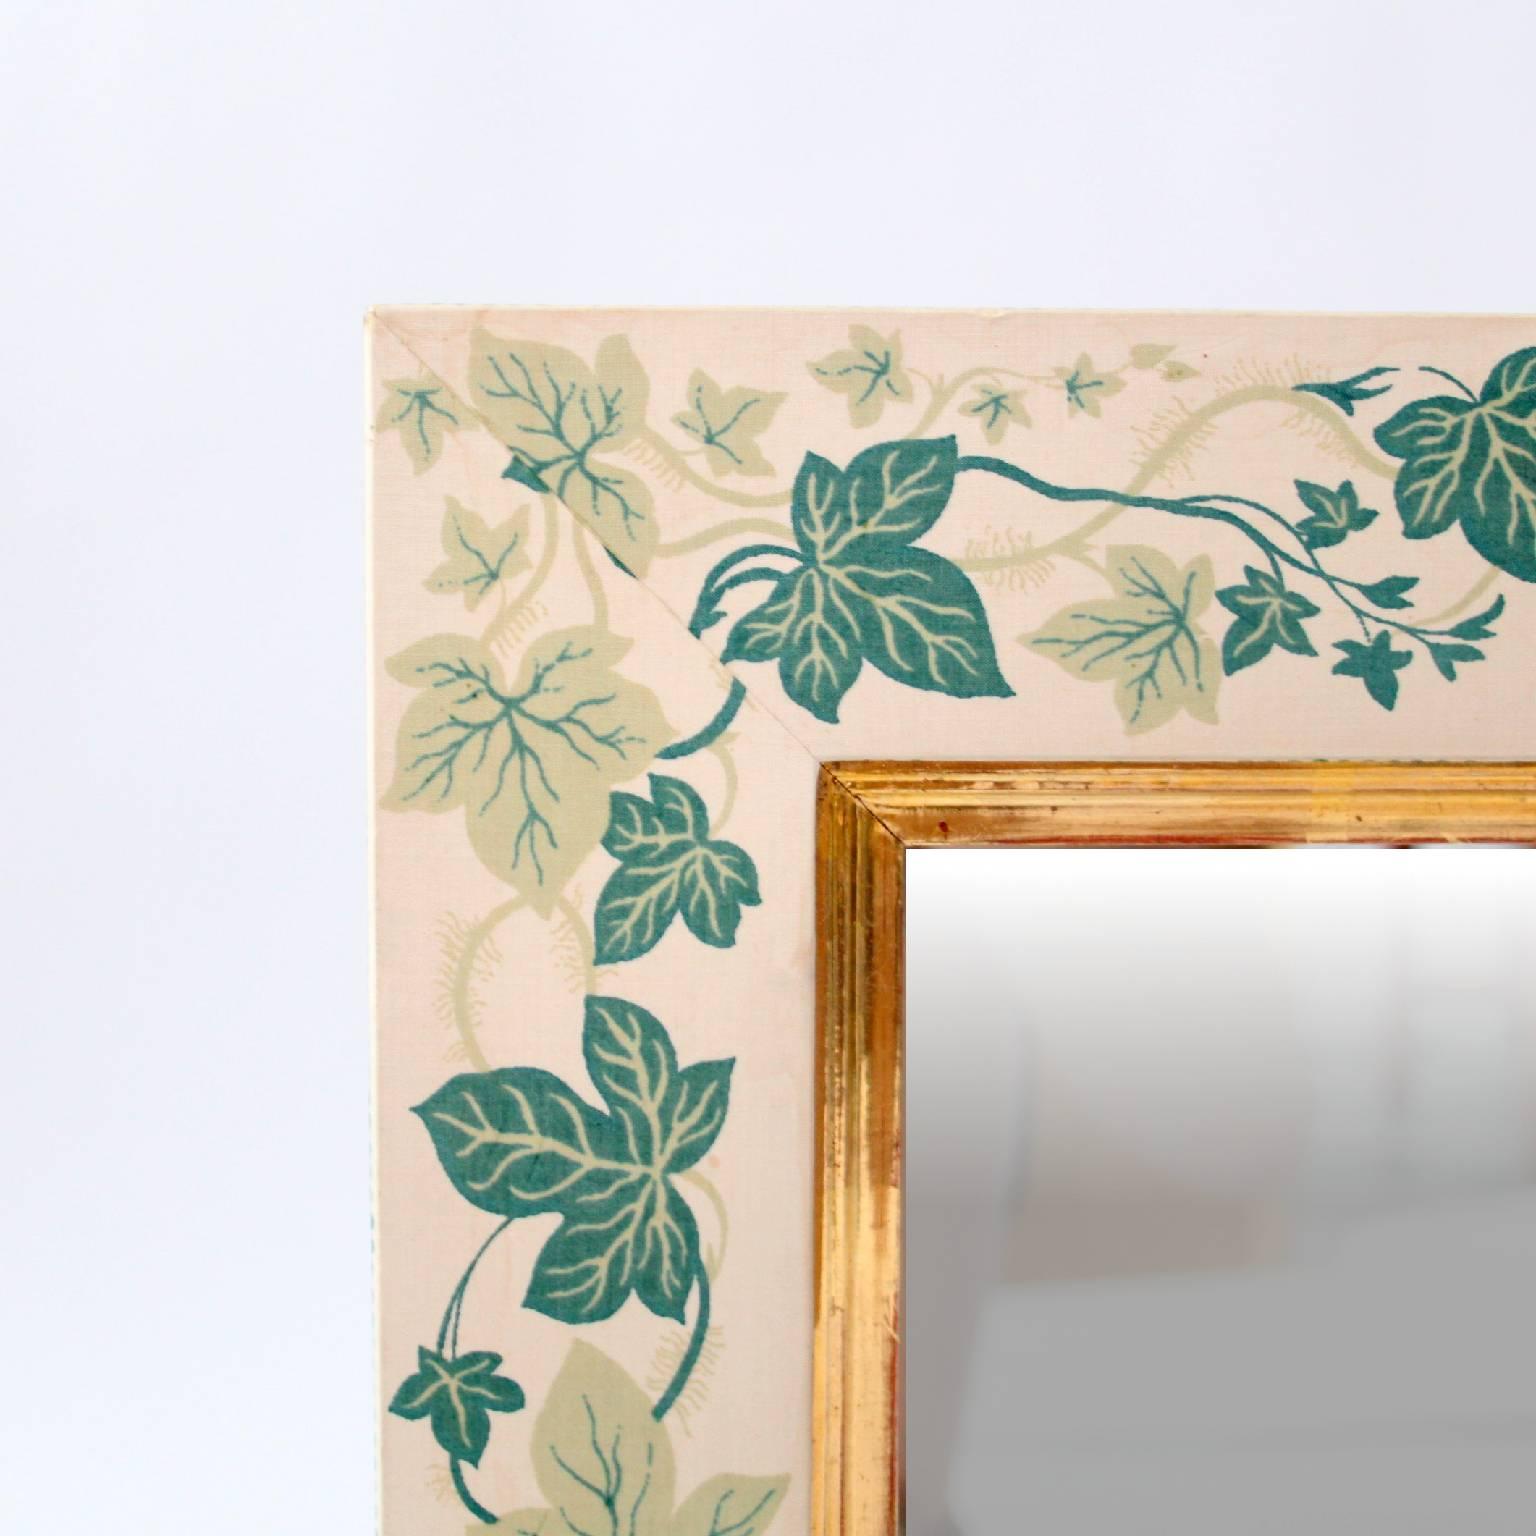 ESTRID ERICSON AND SVENSKT TENN   -   SCANDINAVIAN MODERN

A beautiful linen covered mirror by the Swedish pioneer in design, Estrid Ericson.

The linen covered frame is decorated with ivy leaves. Gilded detail along the inner edge of the